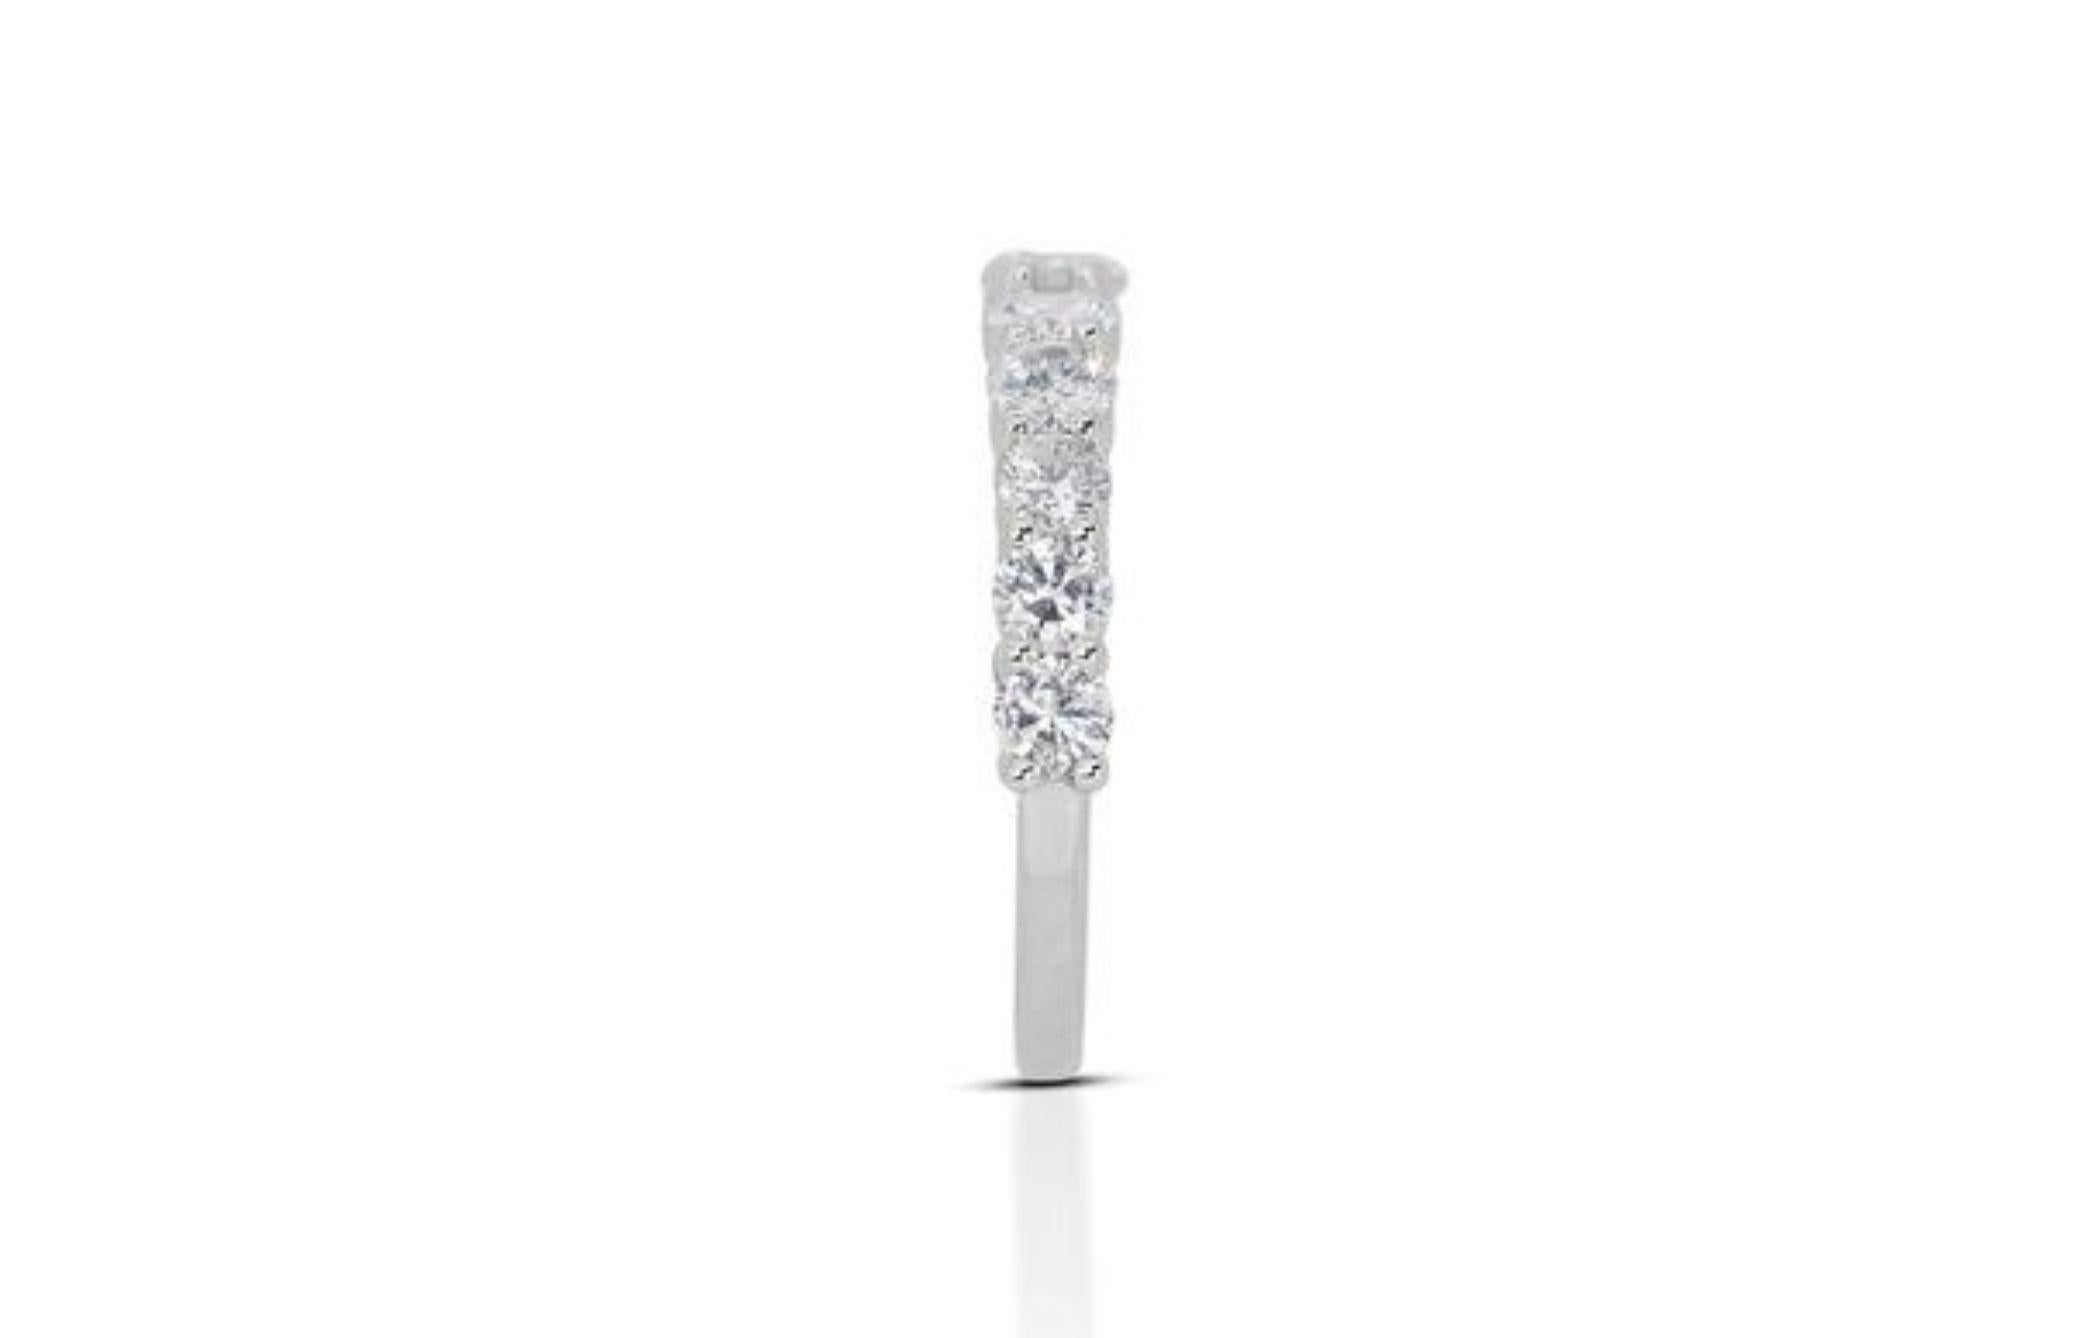 Stunning 1.58ct Round Brilliant Diamond Ring in 14k White Gold For Sale 3